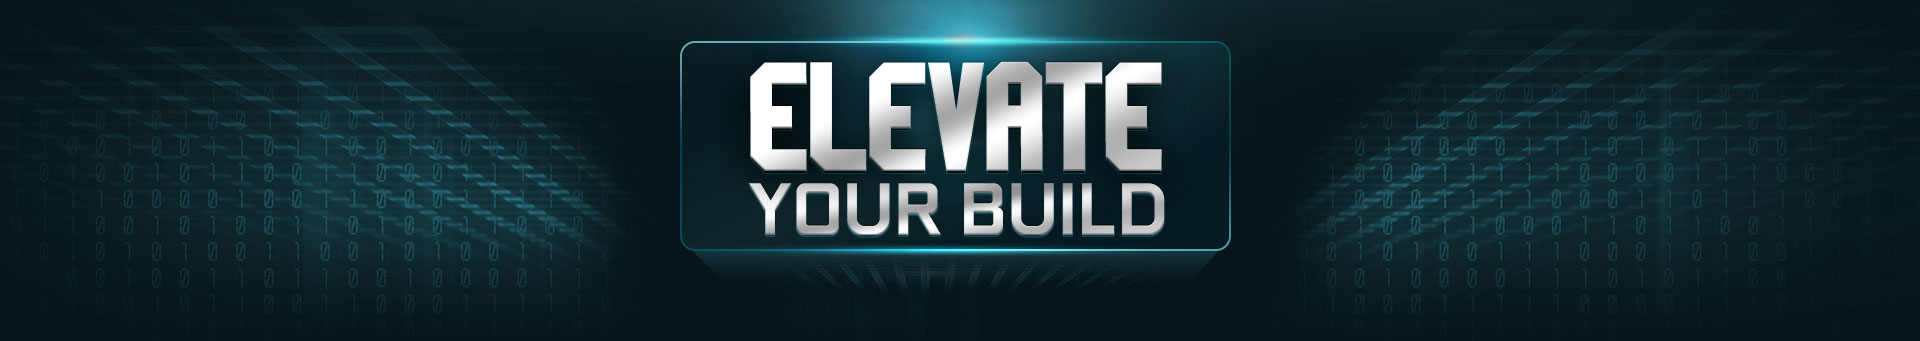 ELEVATE YOUR BUILD